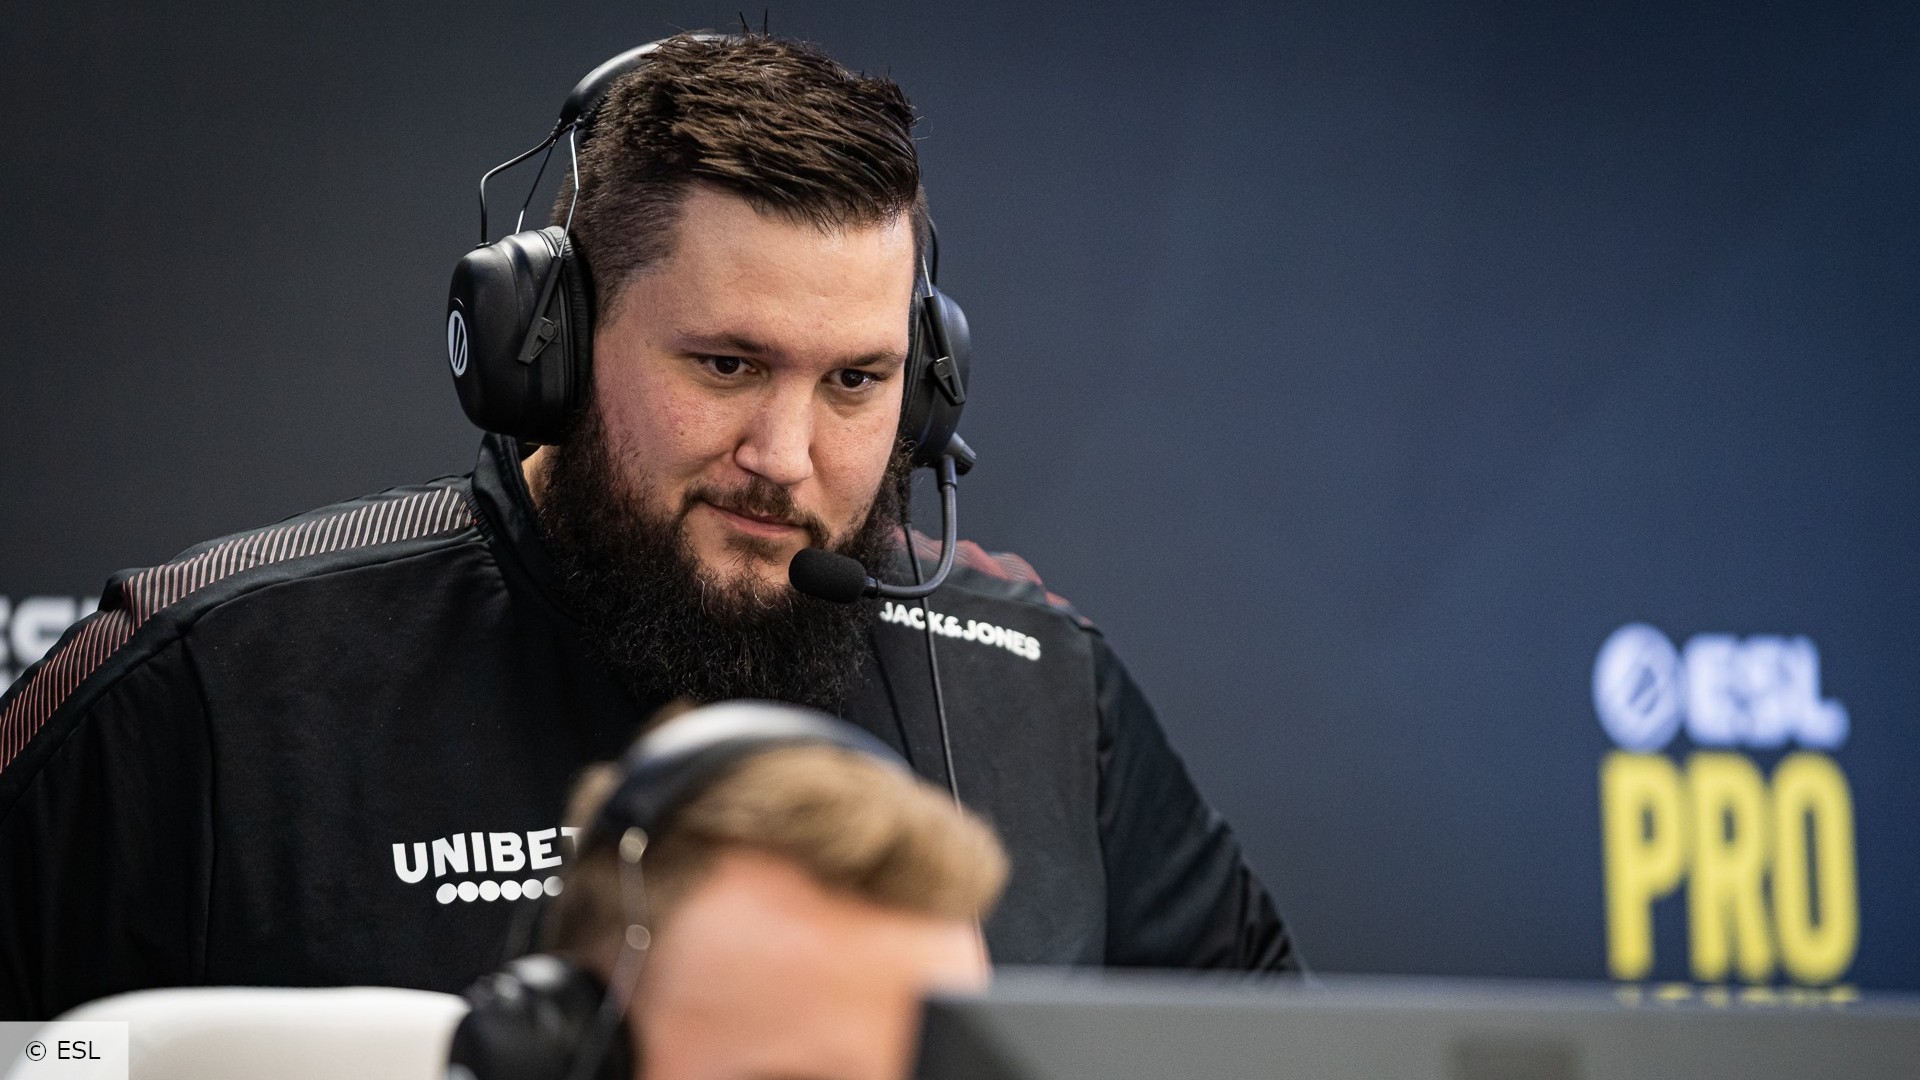 zonic might coach Vitality in the new season